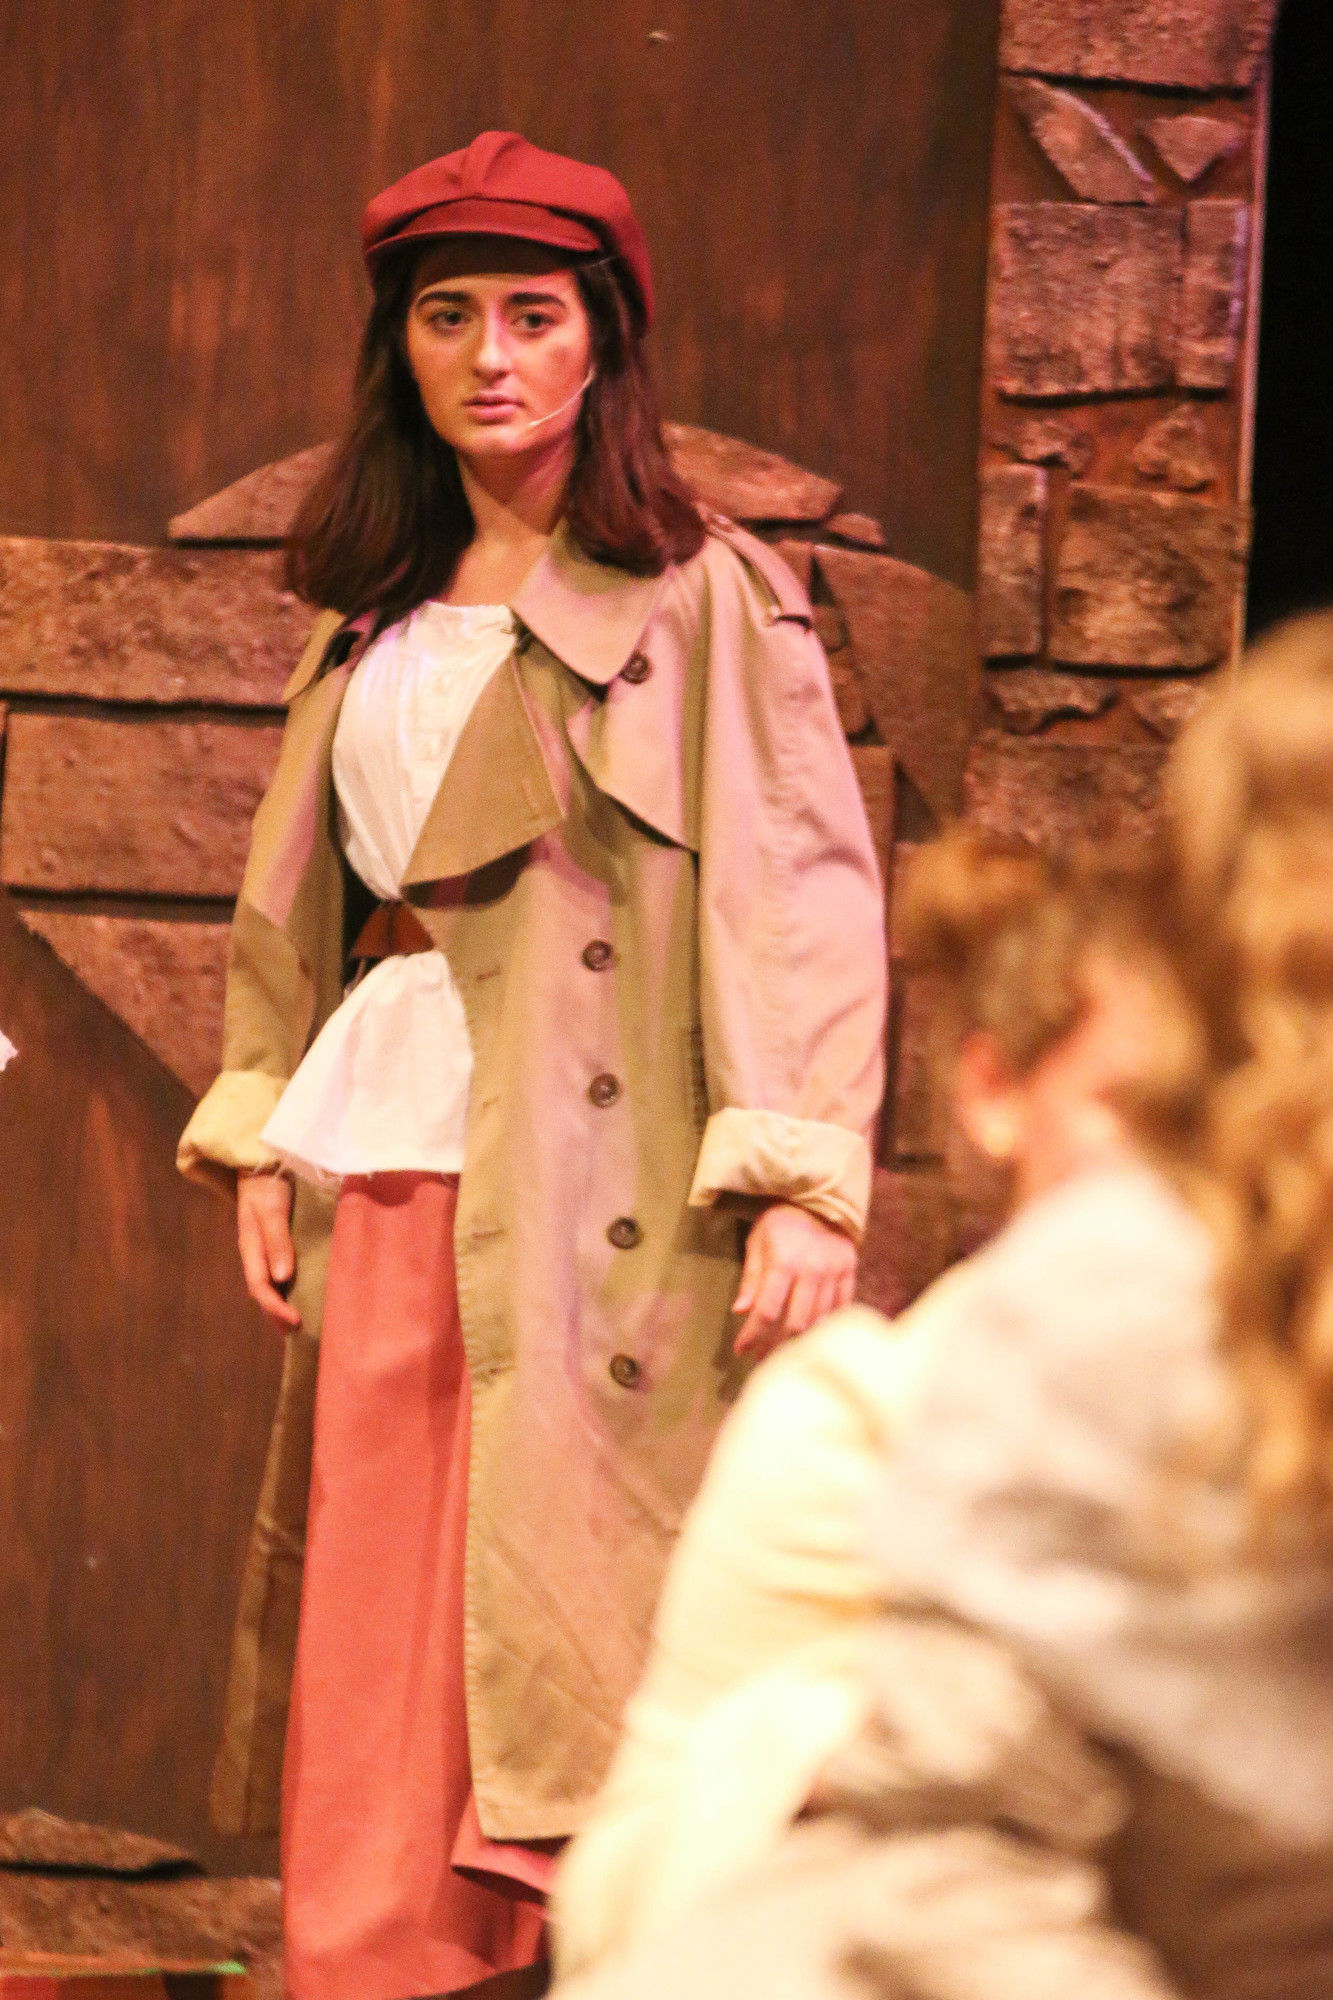 Elana Sobhani, as Eponine, watches Cosette and Marcus meet for the first time. Photo by Paige Wilson